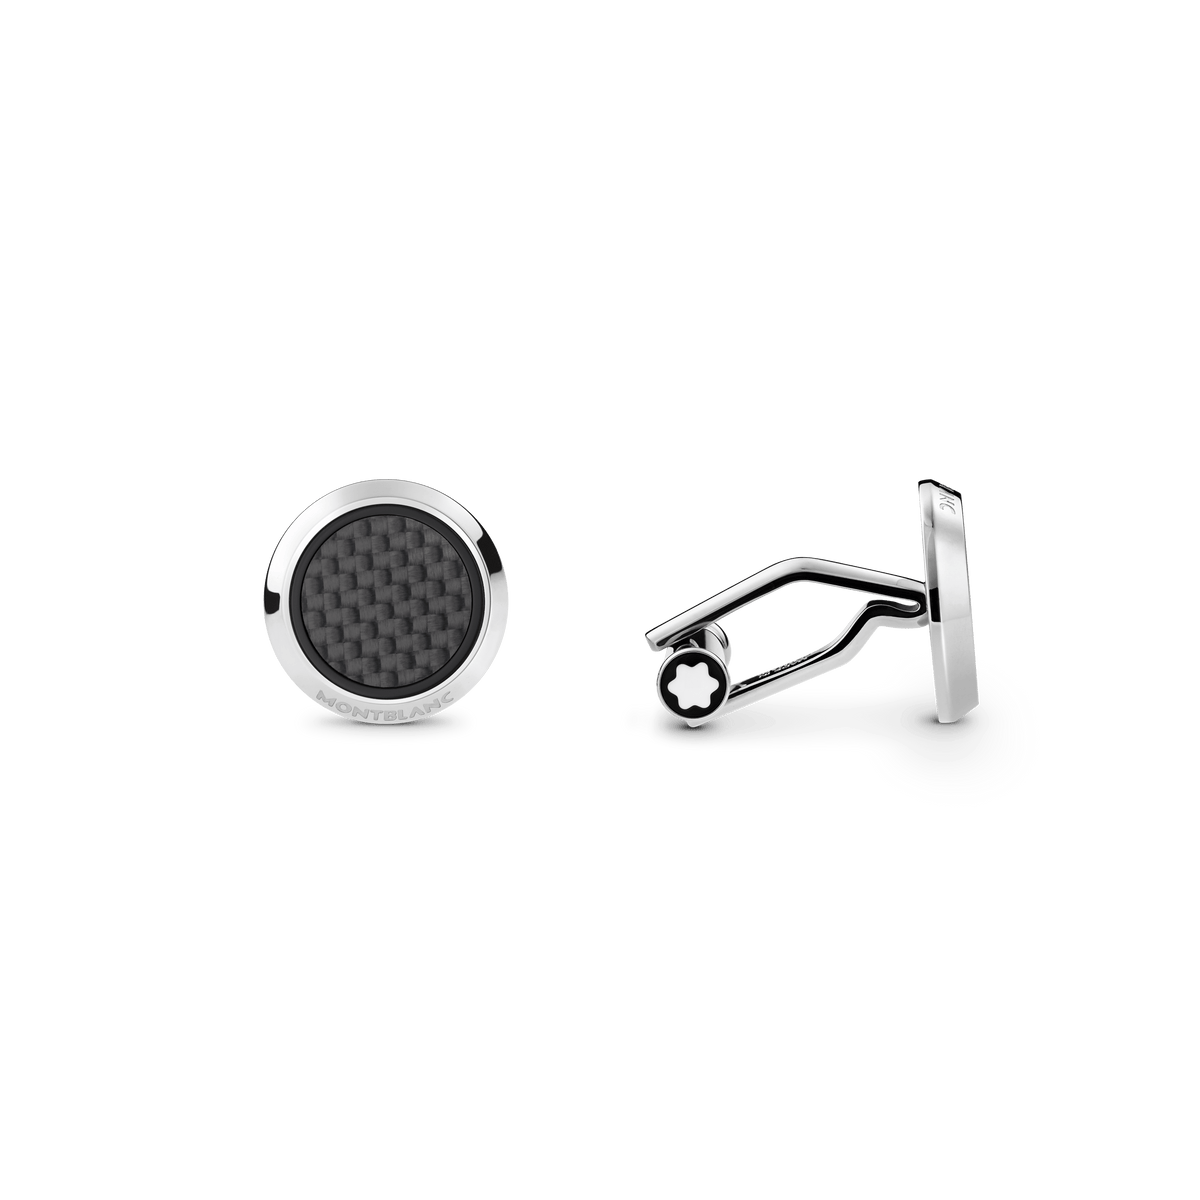 Cufflinks, round in stainless steel with carbon-patterned inlay